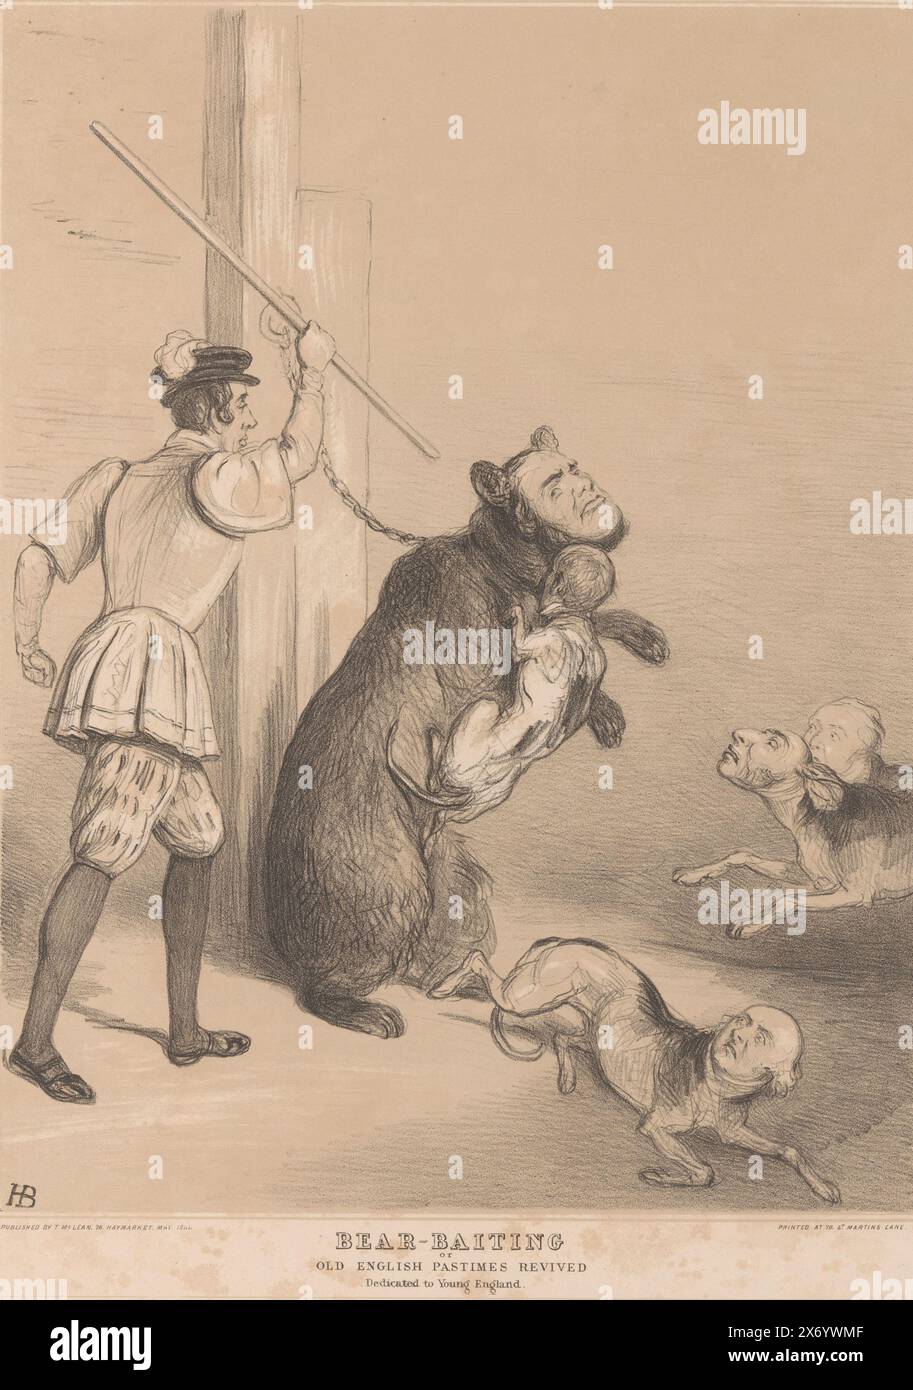 Cartoon about William Ferrand, Bear-baiting or Old English pastimes revived, Dedicated to Young England (title on object), HB Sketches (series title on object), Cartoon in which William Busfeild Ferrand is depicted as a chained bear being beaten by a man with a stick, Benjamin Disraeli, and is attacked by dogs. Published as no. 806 in the HB Sketches series., print, print maker: John Doyle, (mentioned on object), printer: General Lithographic Establishment, (mentioned on object), publisher: Thomas McLean, (mentioned on object), print maker: England, printer: London, publisher: London, May- Stock Photo